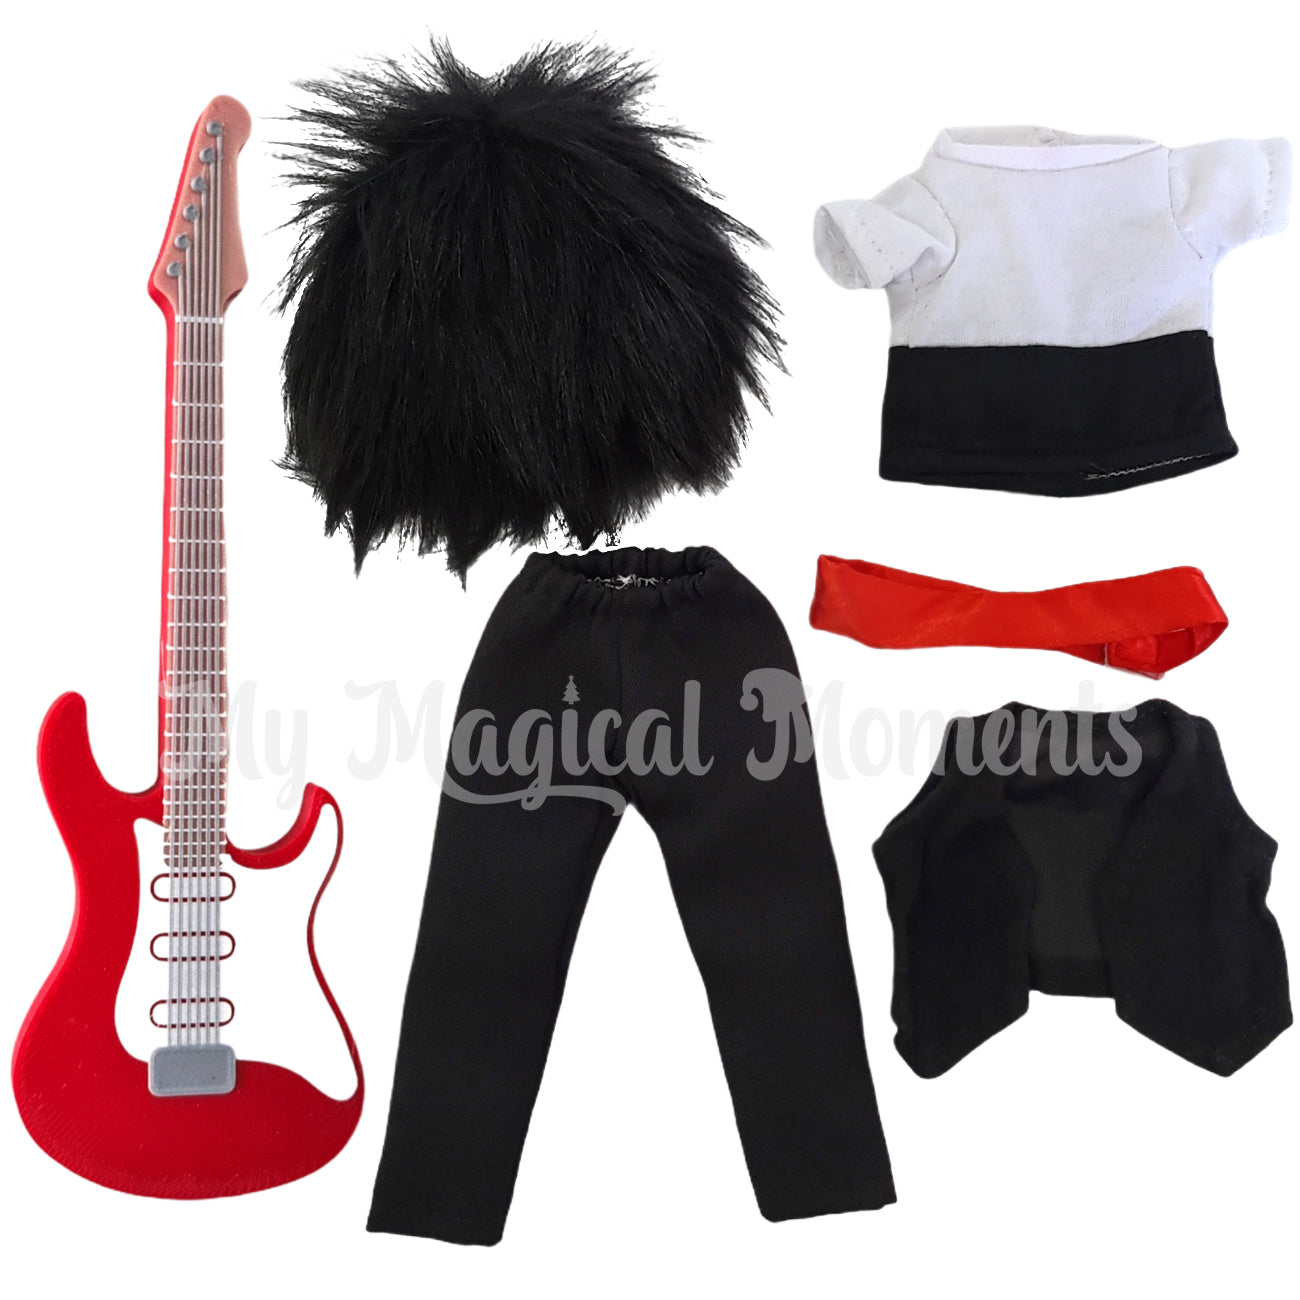 Rockstar elf outfit, black wig, rocker vest, miniature red and white electric guitar